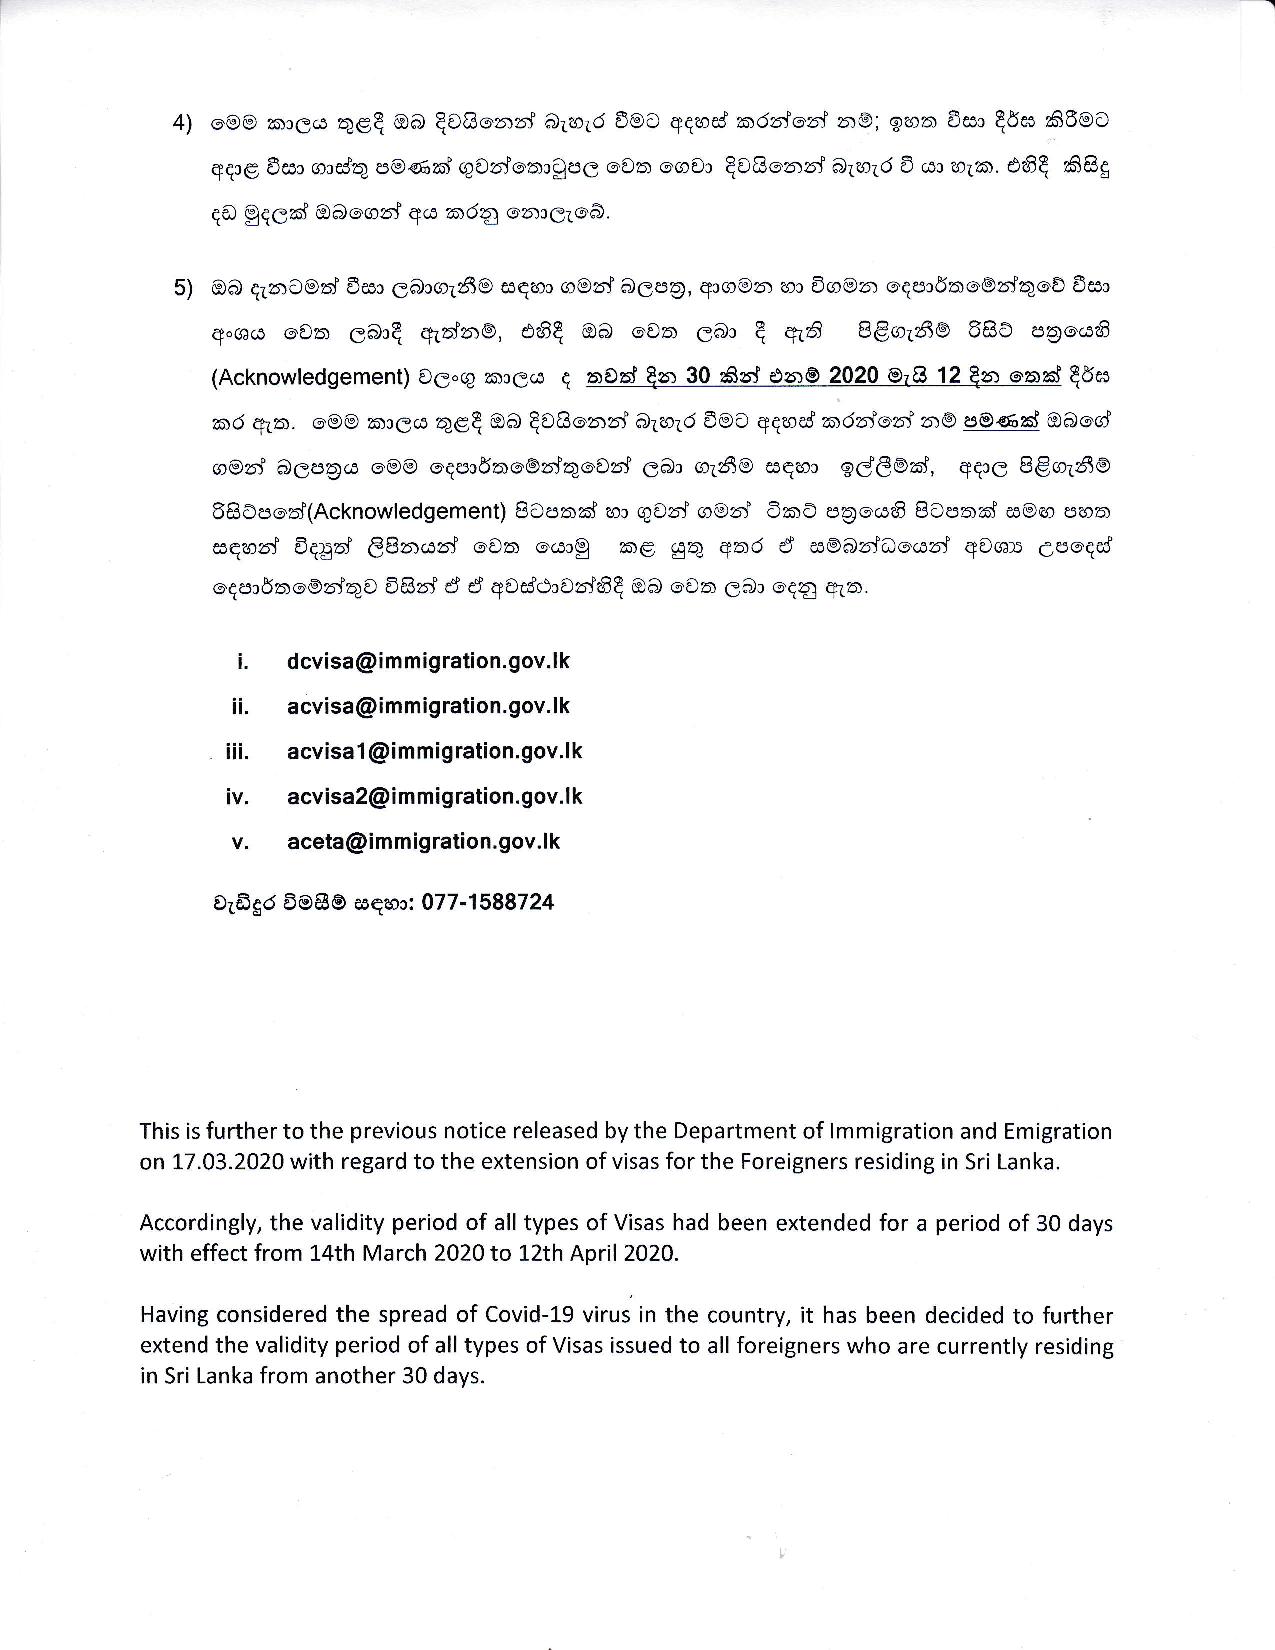 Department of Immigration and Emigration page 002